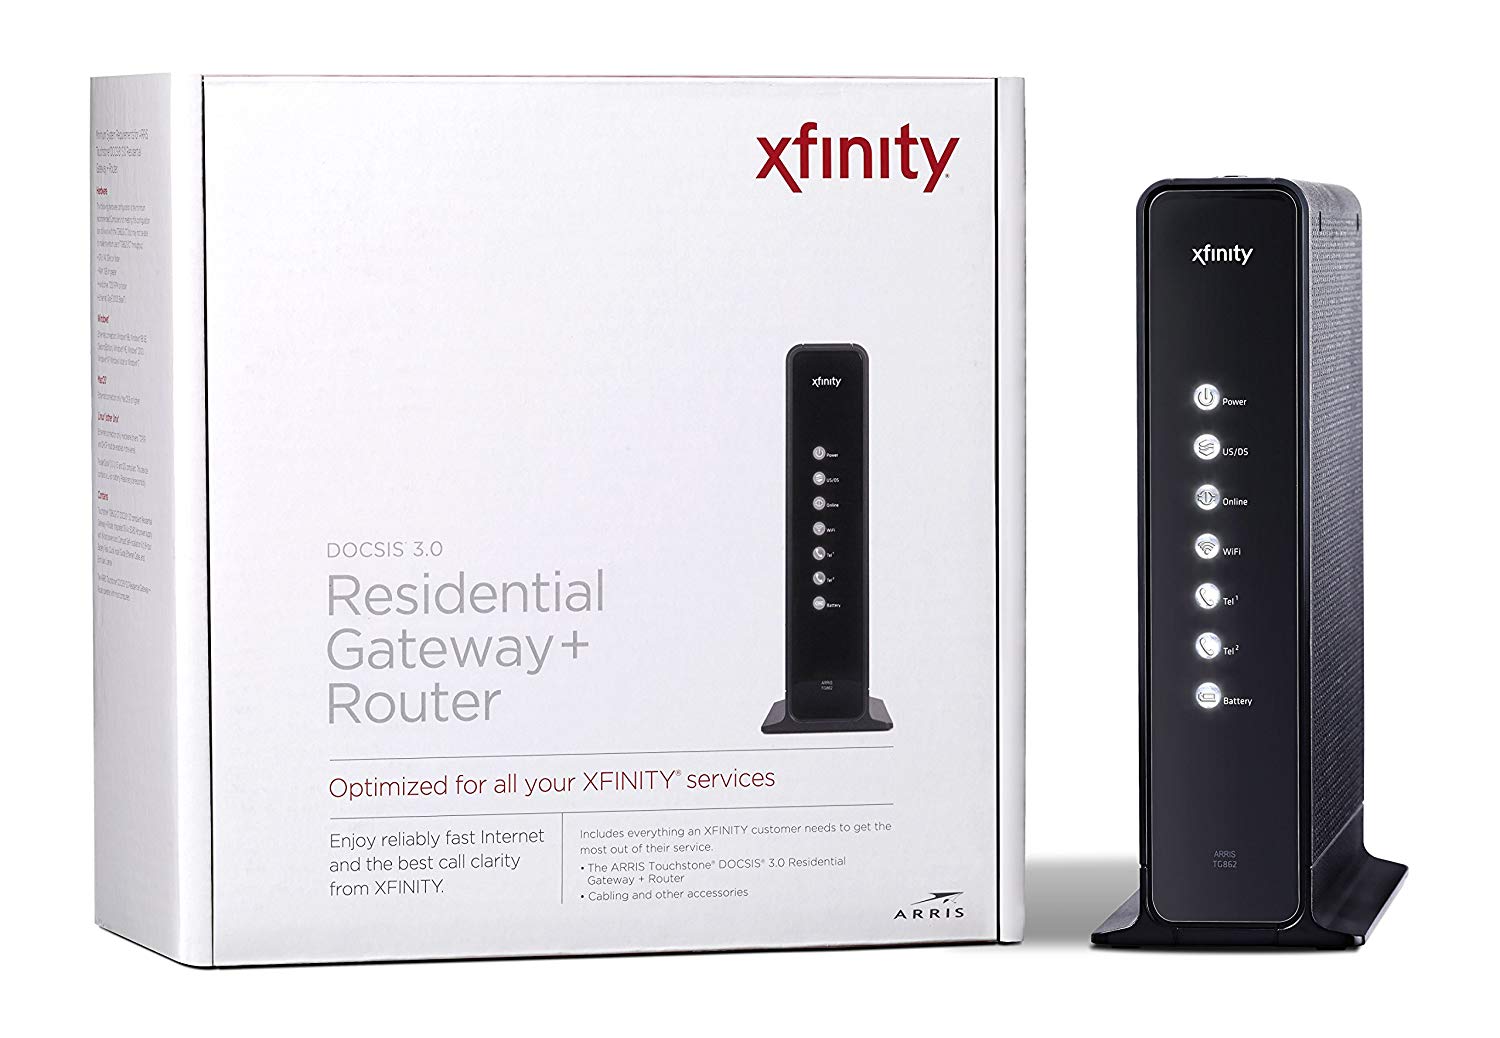 How to Change Username and Password of Xfinity Router